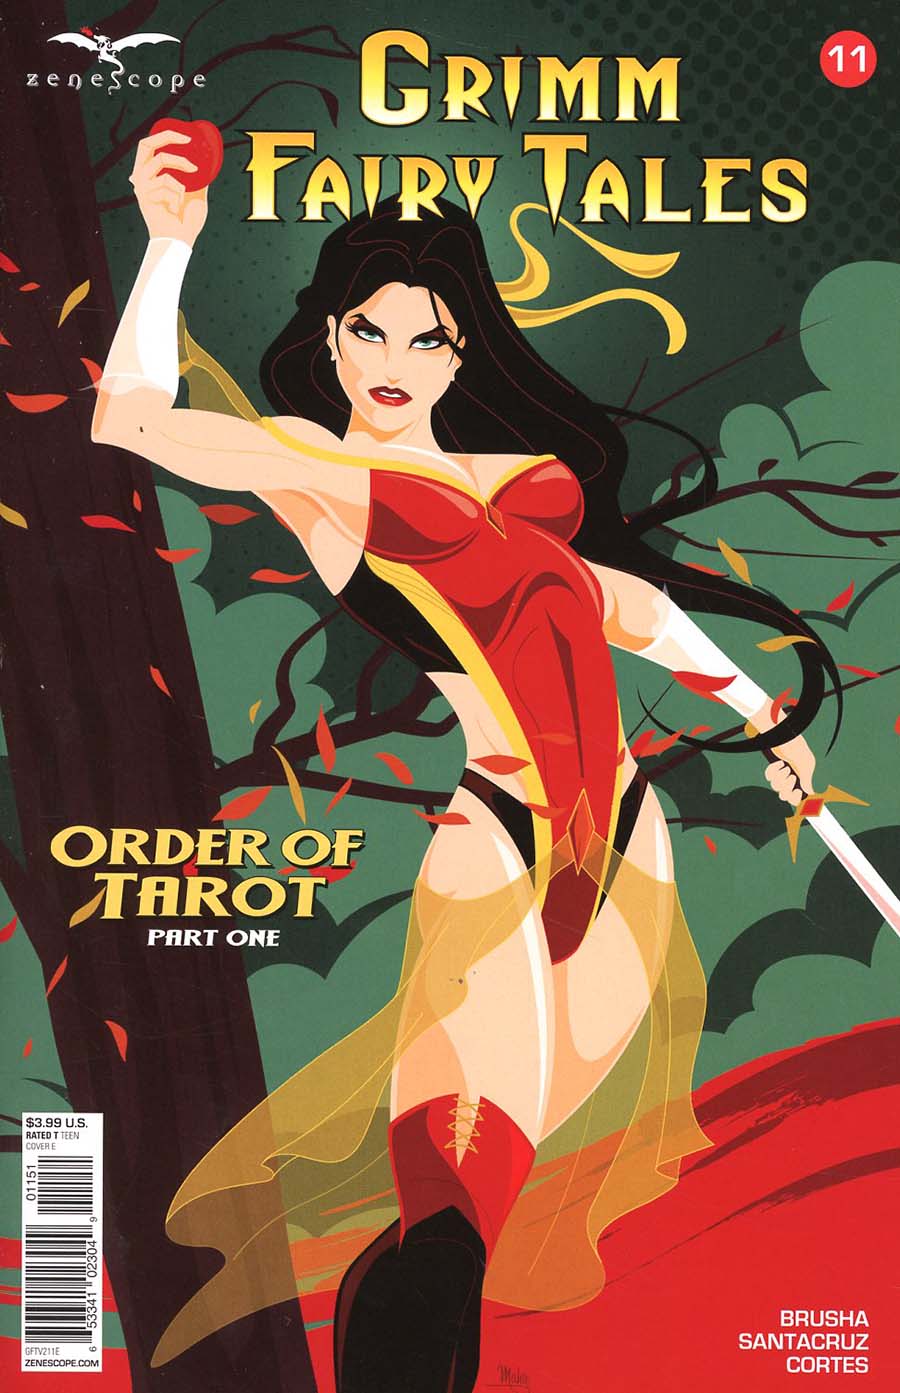 Grimm Fairy Tales Vol 2 #11 Cover E Mike Mahle